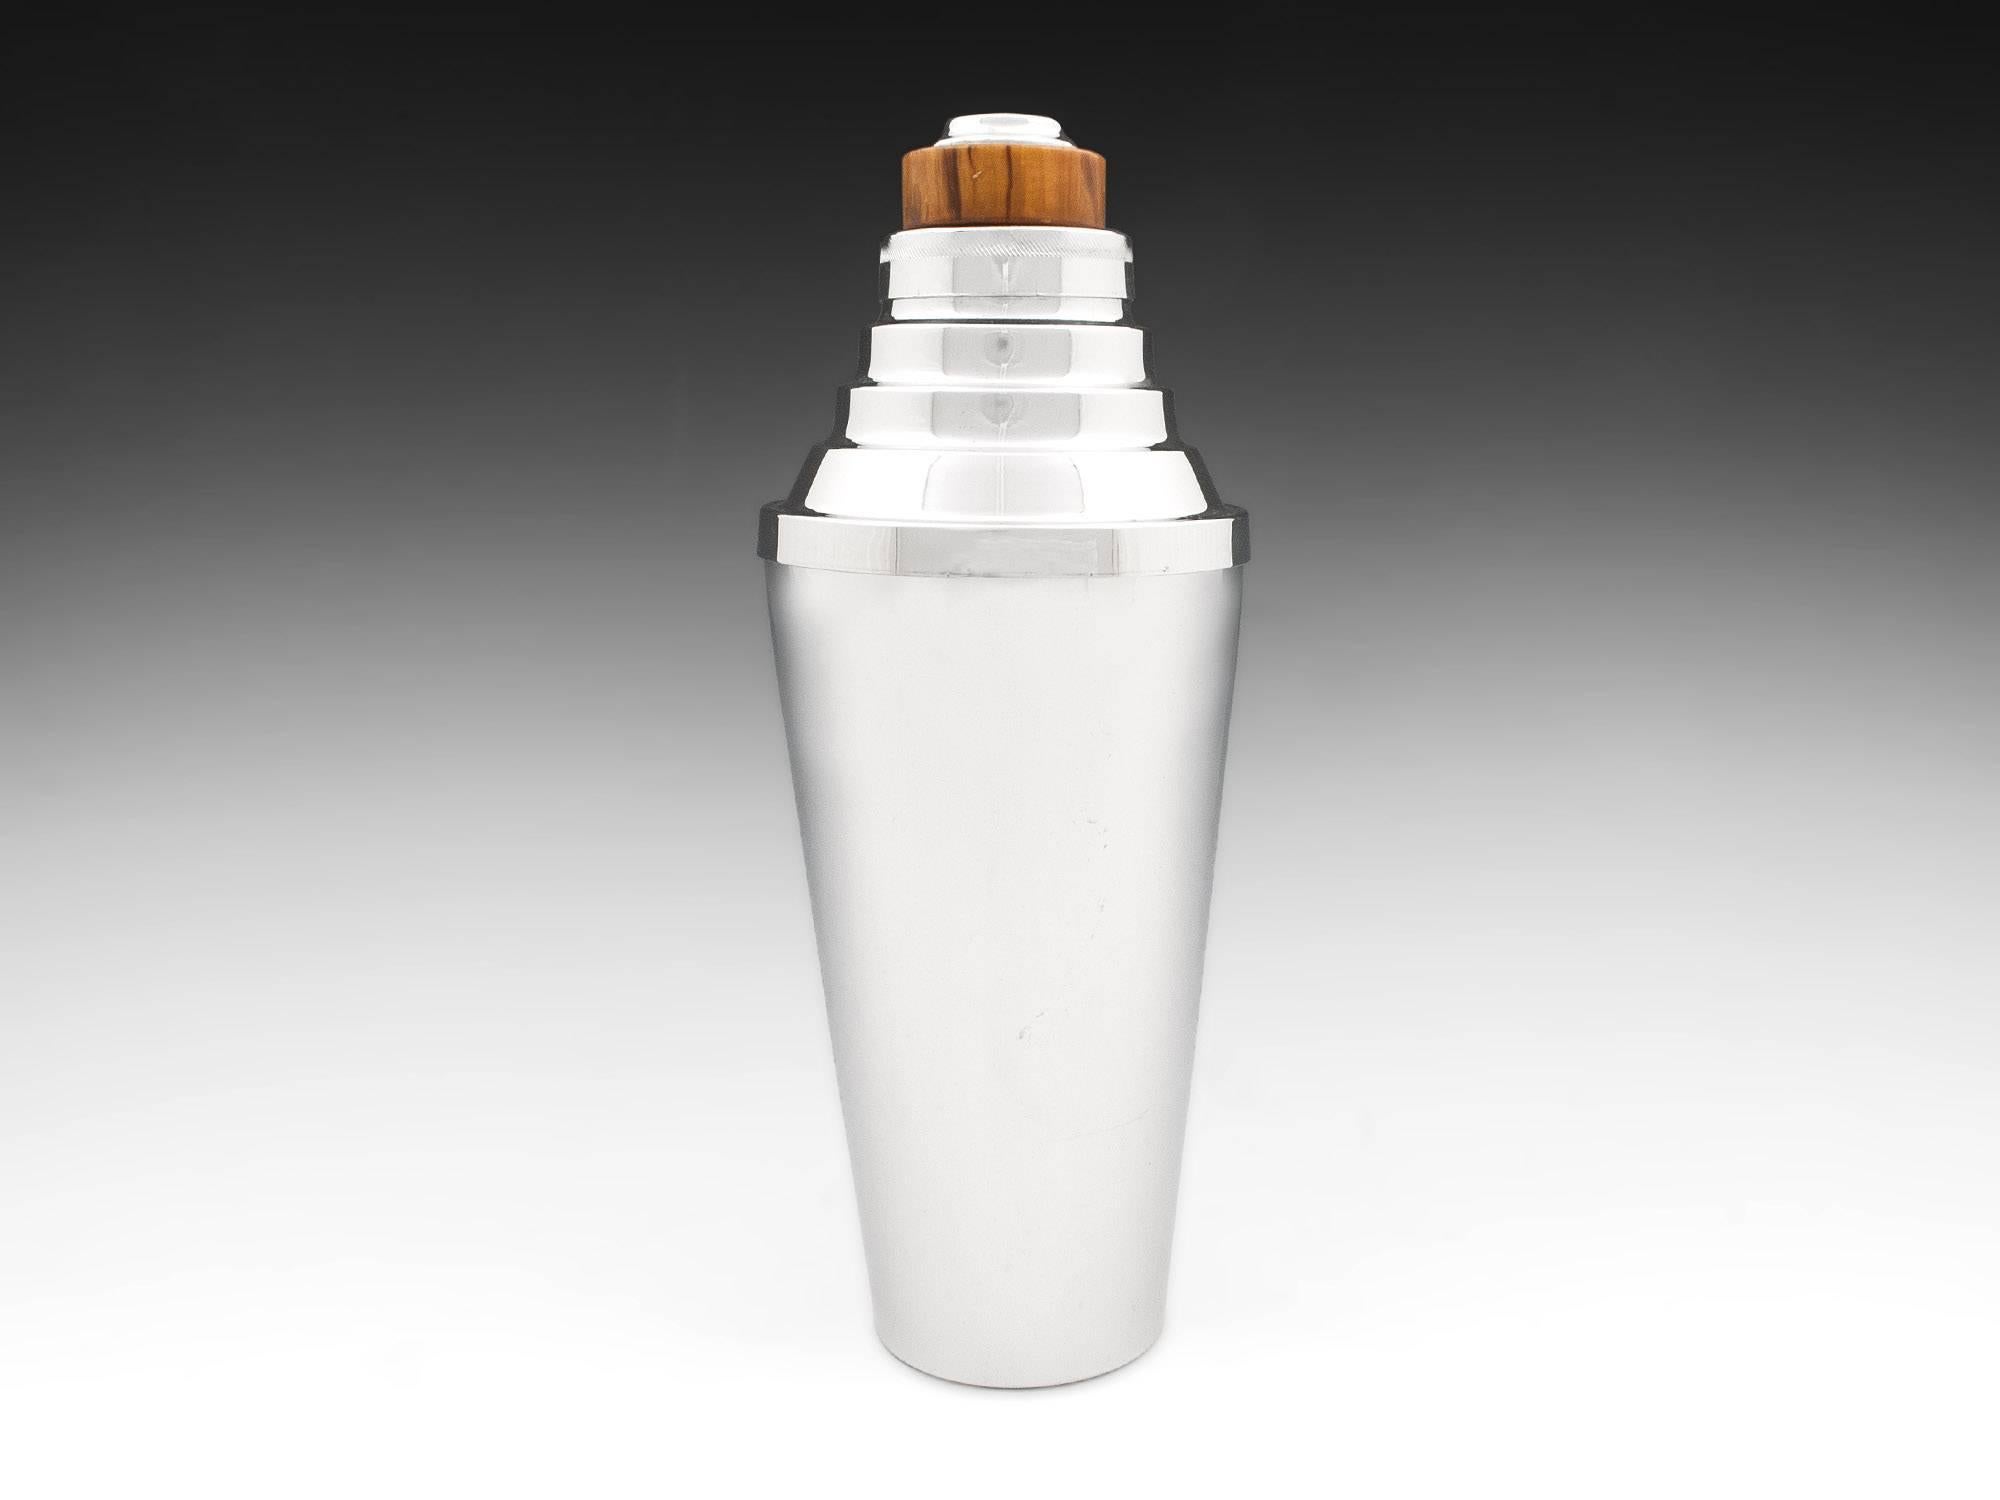 Silver plated cocktail shaker with step shoulder design and bakelite top and silver-plate cap, strainer and collar by Canadian makers Glo-Hill.